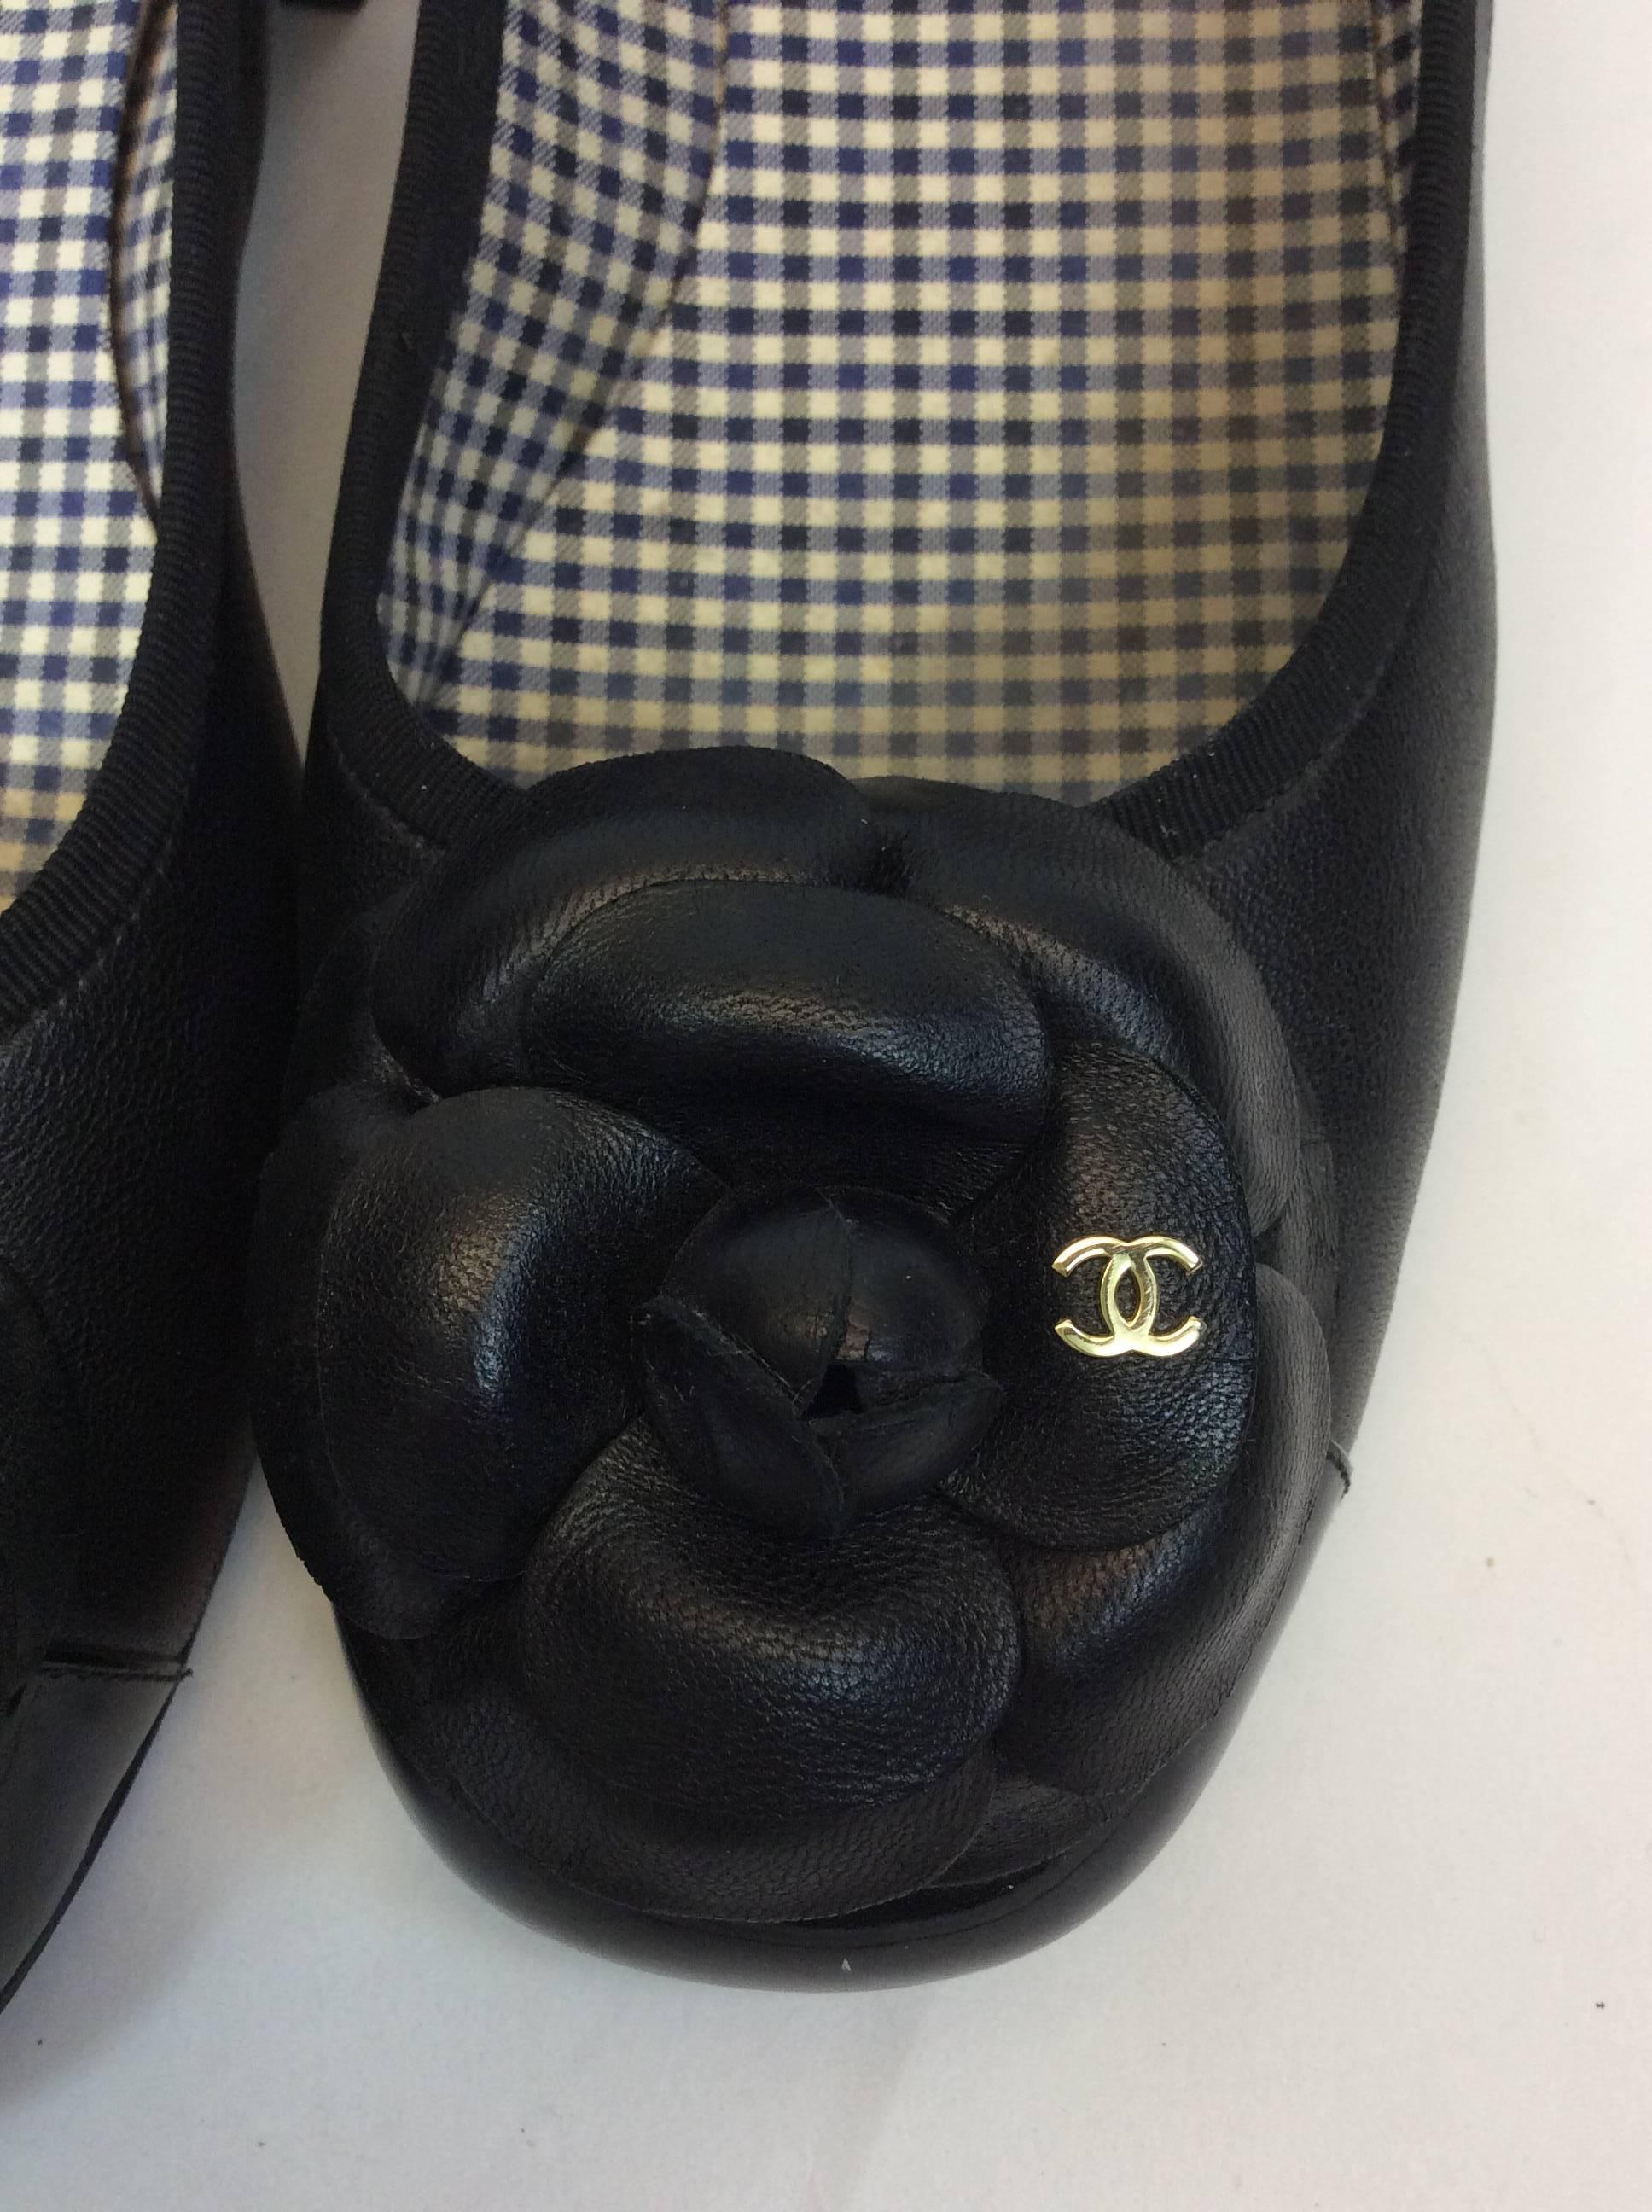 Chanel Black Leather Small Heel With Flower on Toe For Sale 1